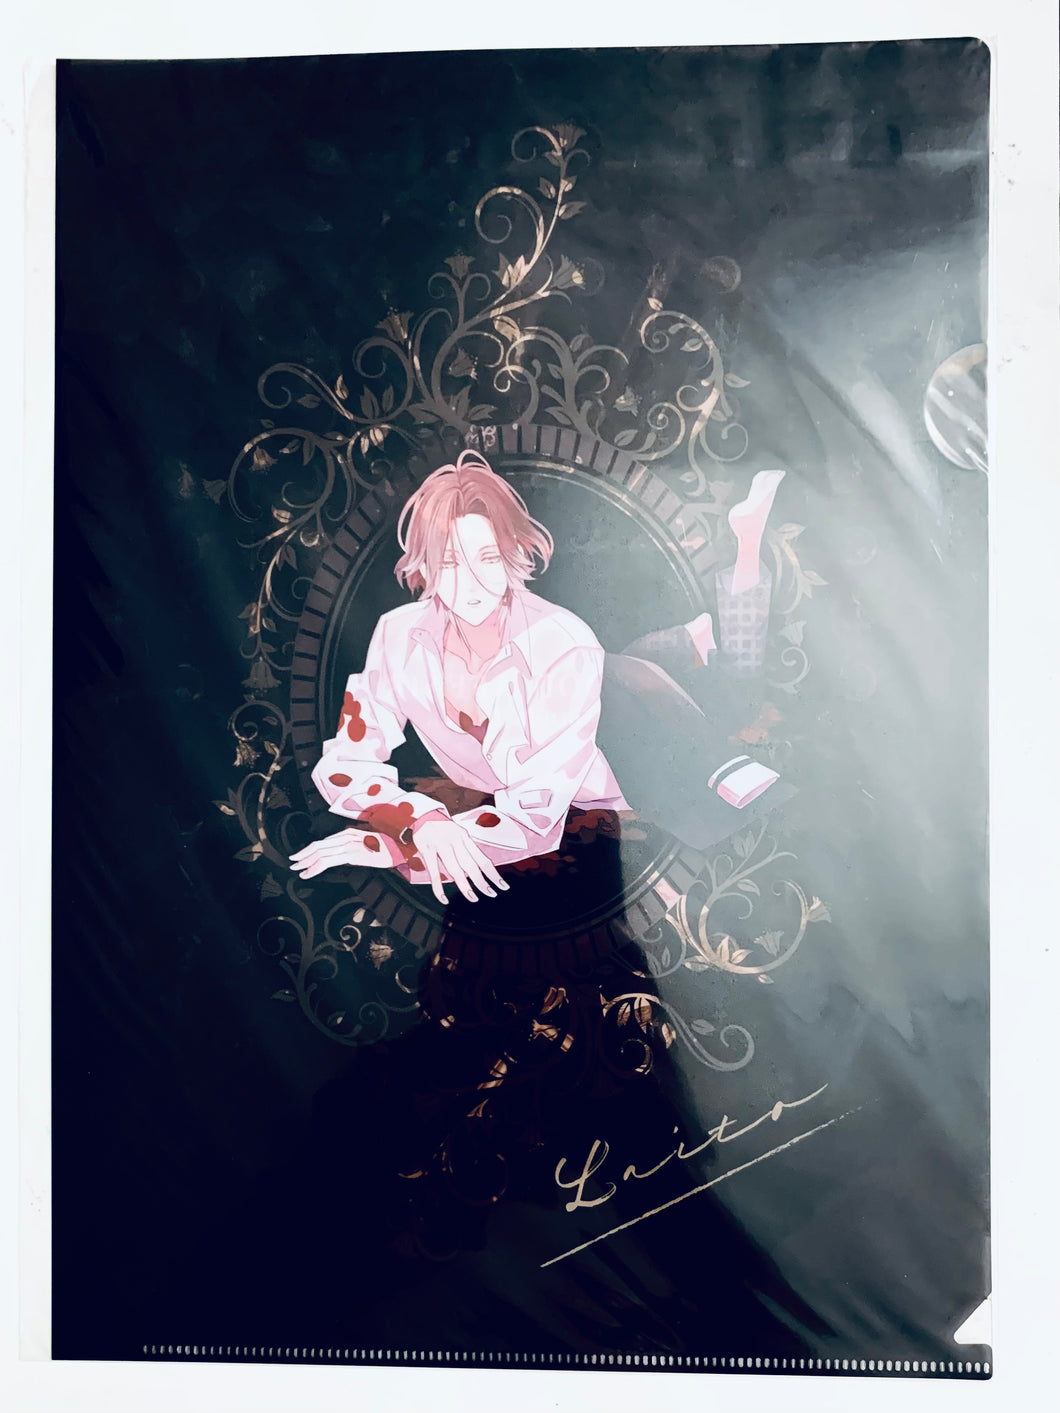 DIABOLIK LOVERS - Sakamaki Laito - A4 Clear File - DL After Sucking Love -Royal Monogram- SKiT Dolce Limited Kuji Type A (D3 Prize)